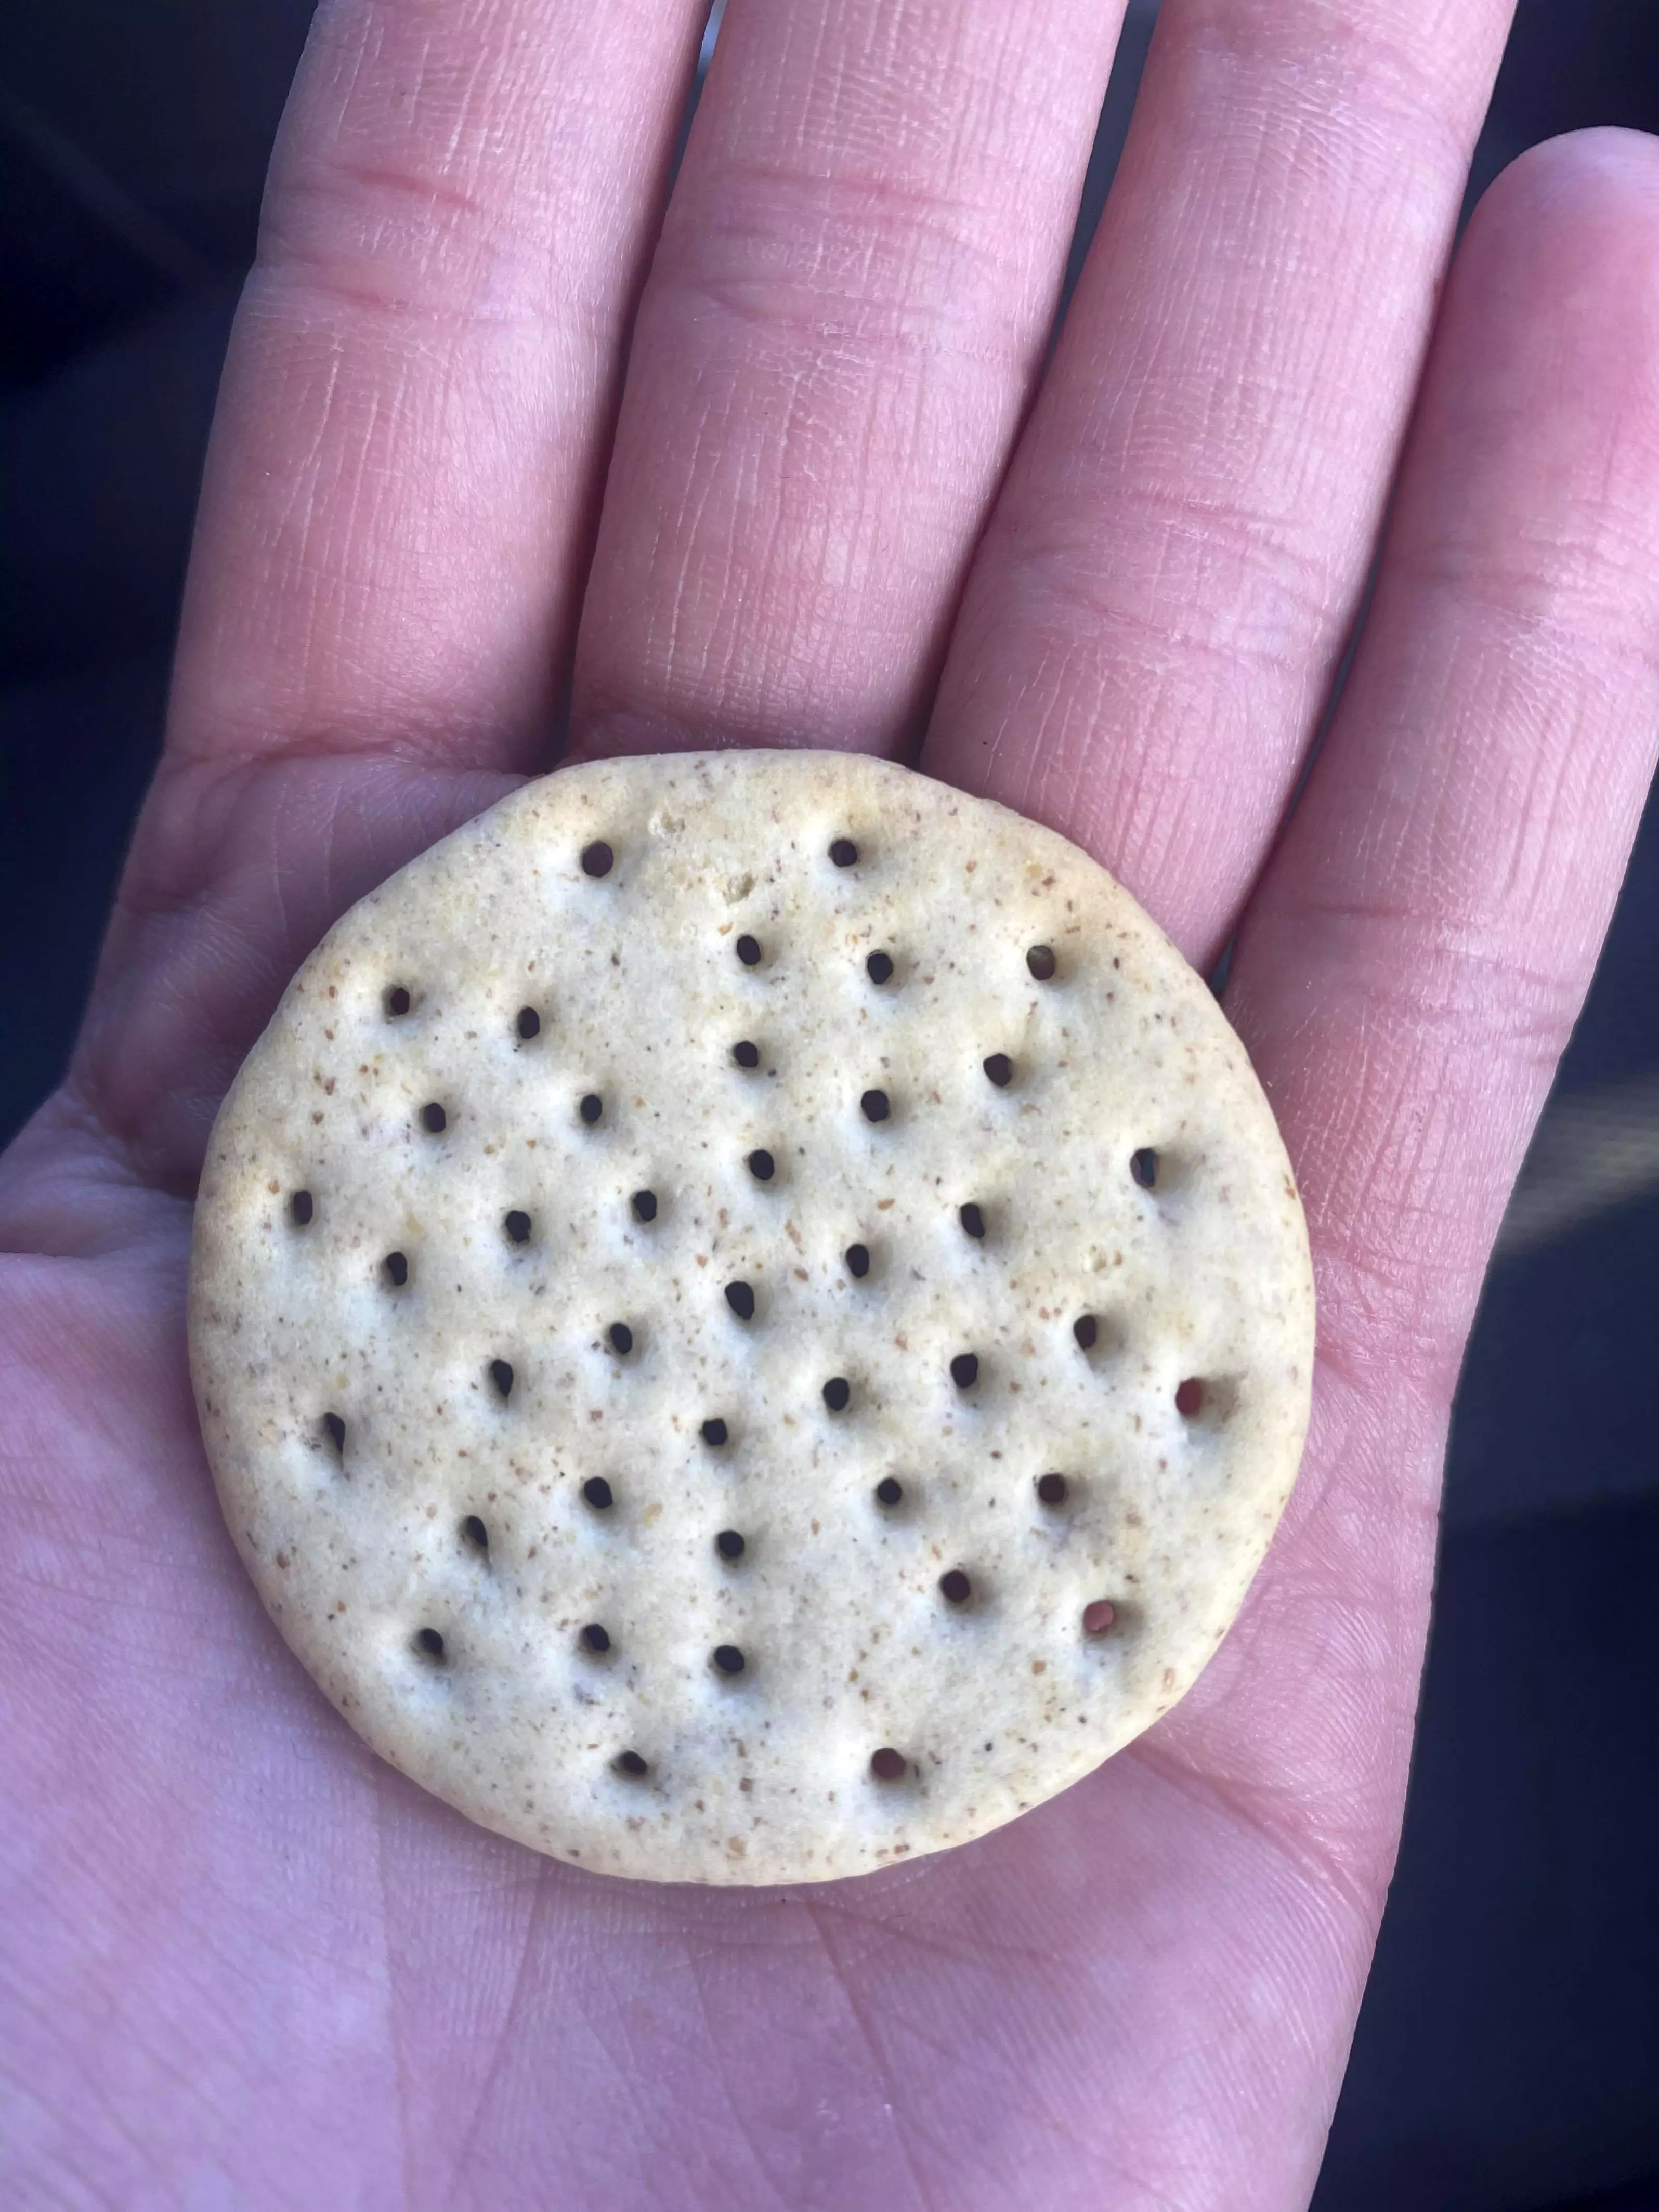 The tiny cracker was from a Dairylea Lunchables pack (